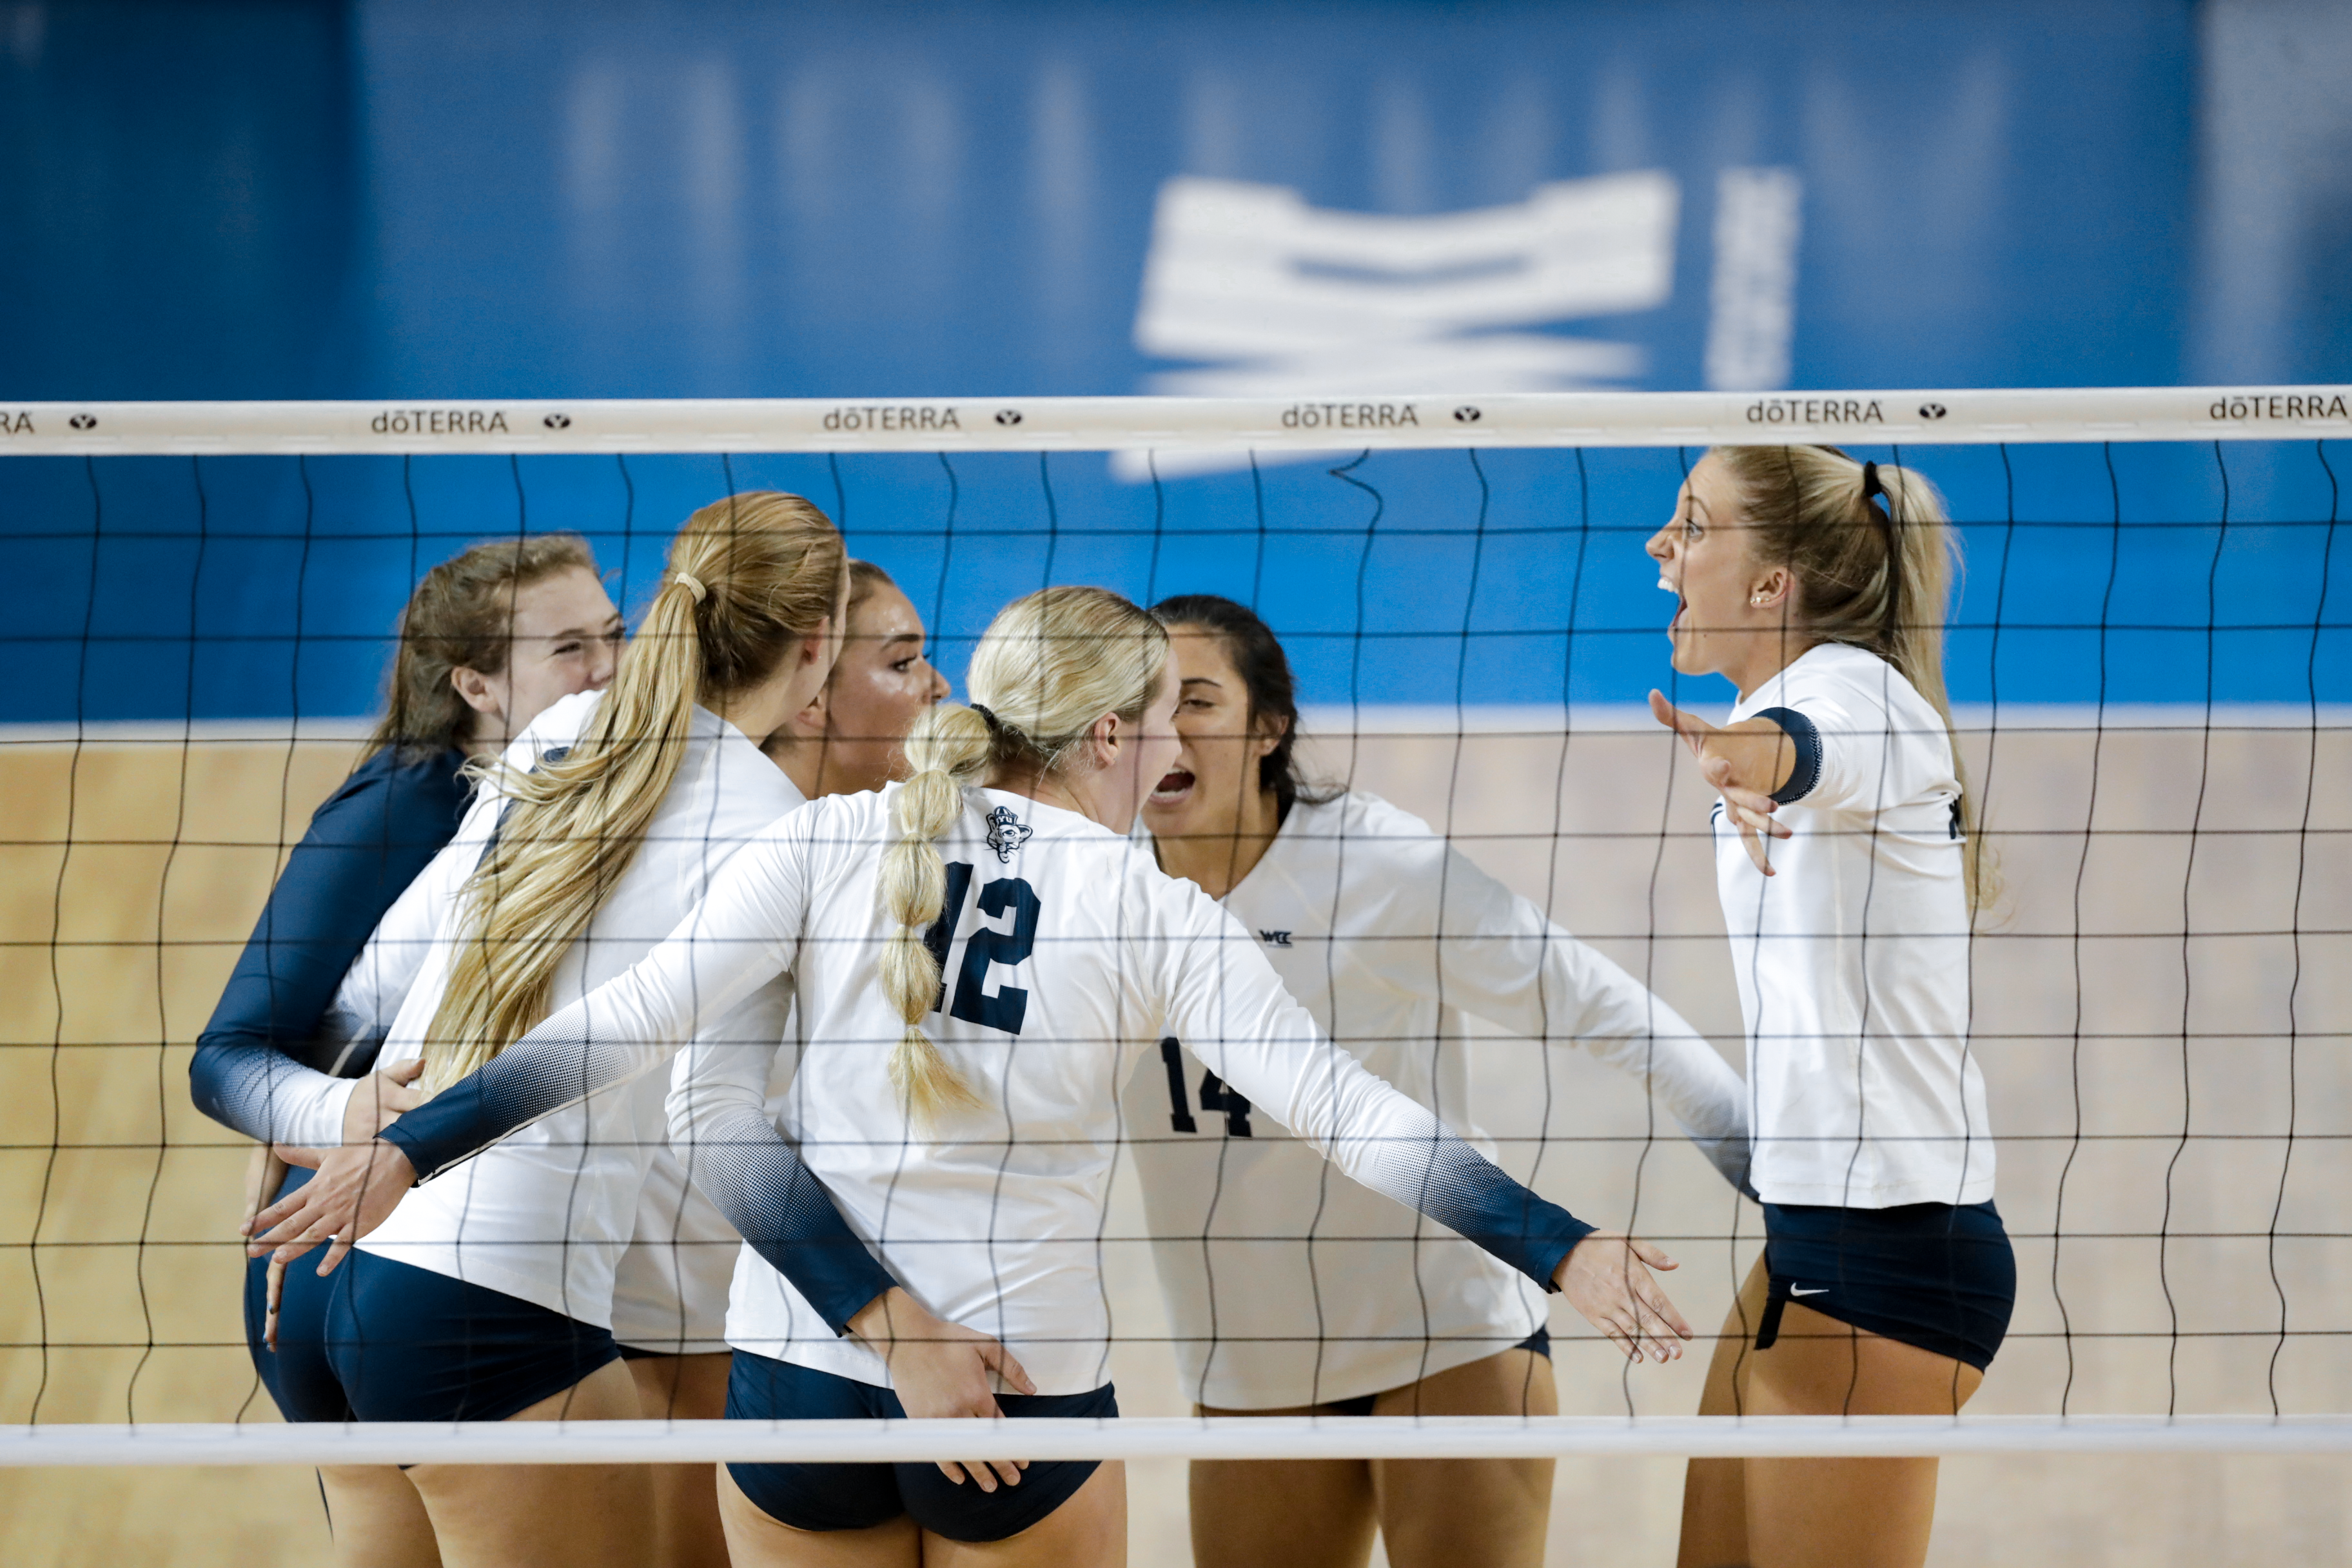 BYU women's volleyball celebrates after scoring a point during a game against LMU.